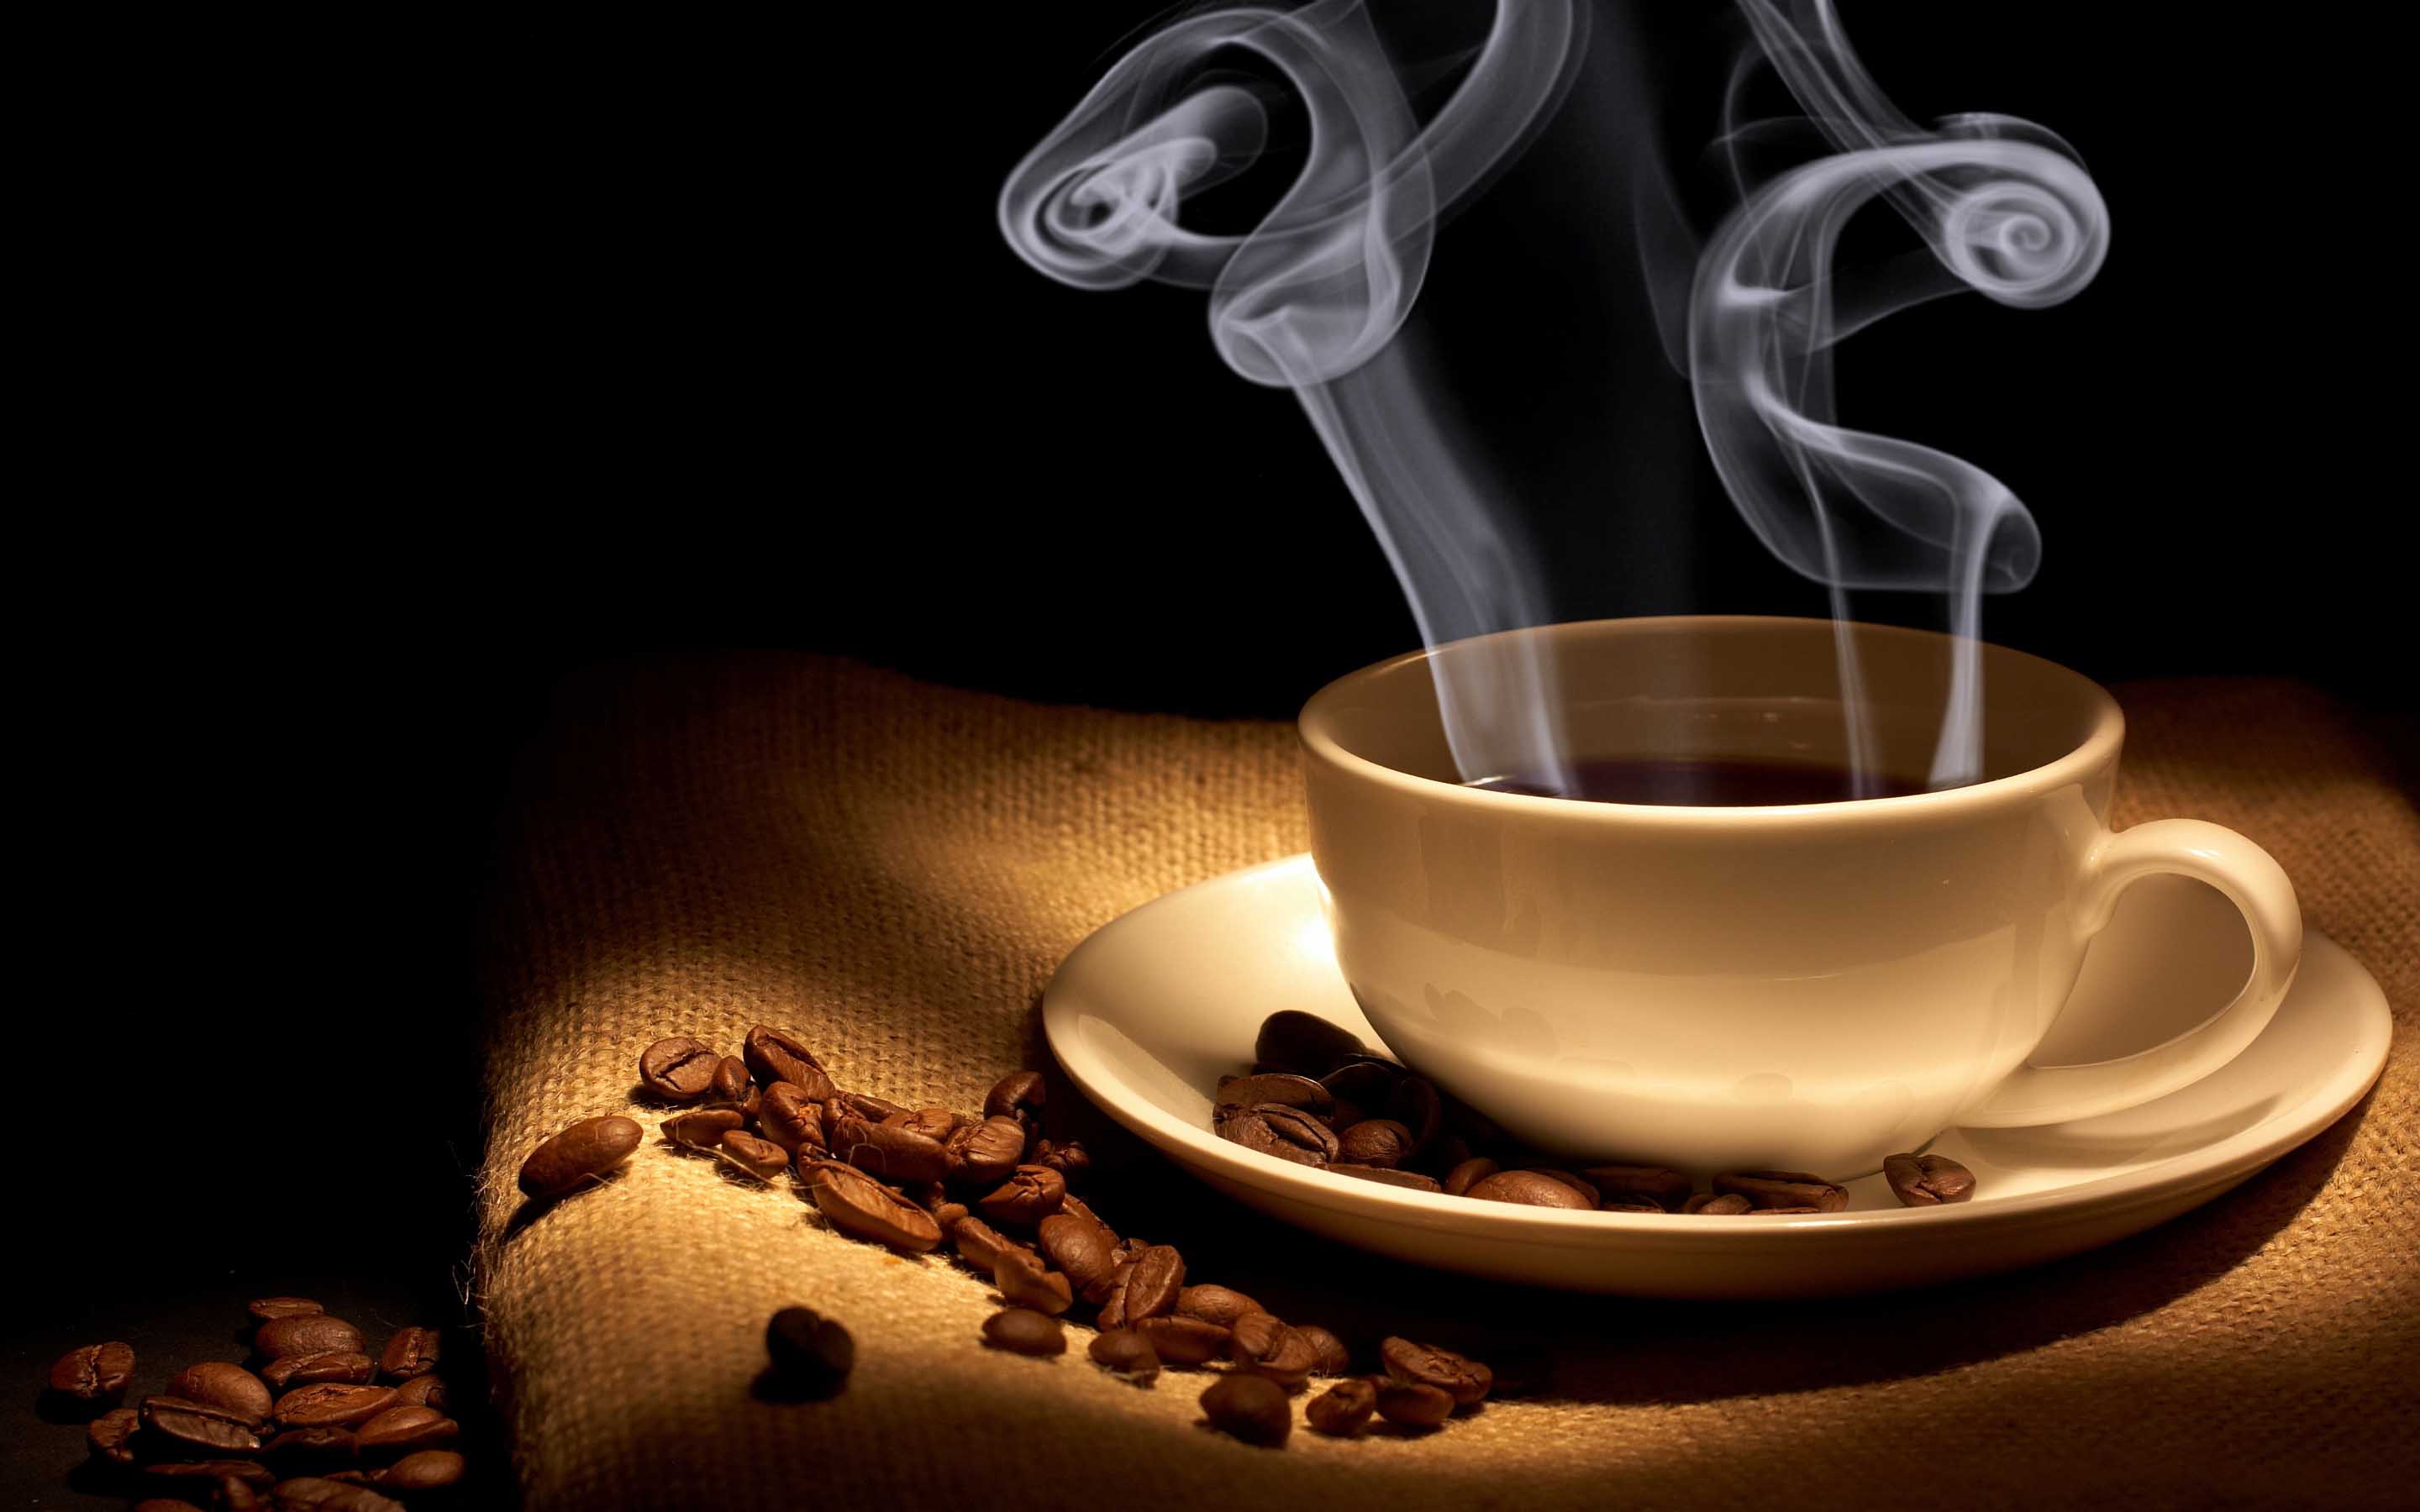 Latest Coffee Cup Hd New Wallpapers Free Download New - Cup Of Hot Coffee -  2880x1800 Wallpaper 